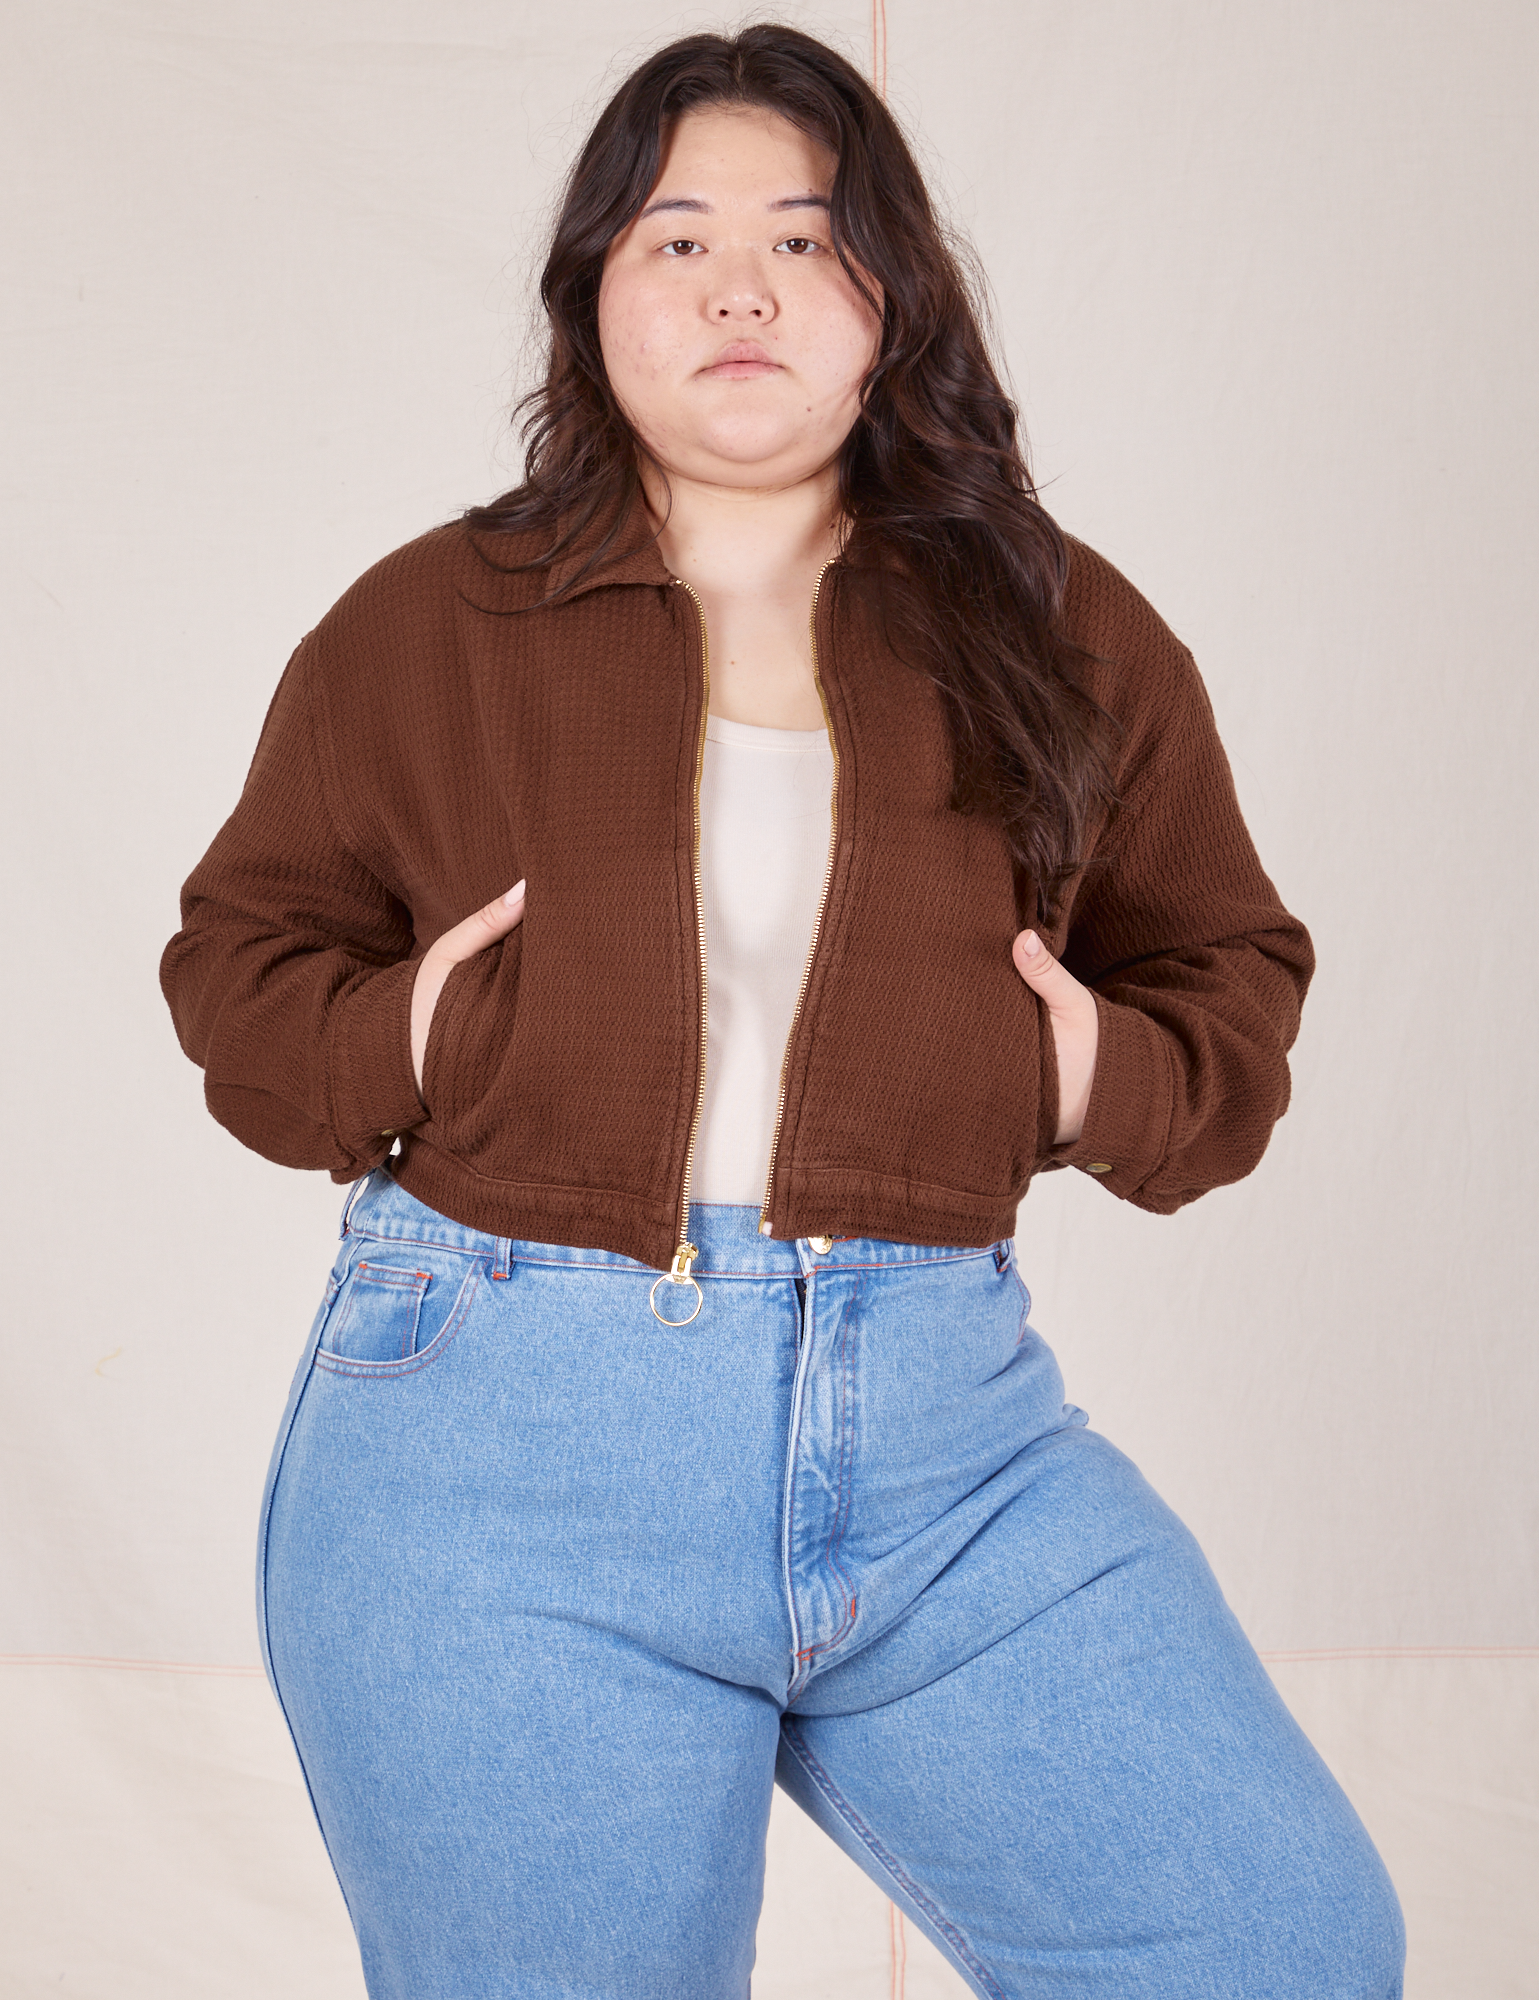 Ashley is 5&#39;7&quot; and wearing L Ricky Jacket in Fudgesicle Brown paired with a vintage off-white Tank Top and Big Bud Press denim pants